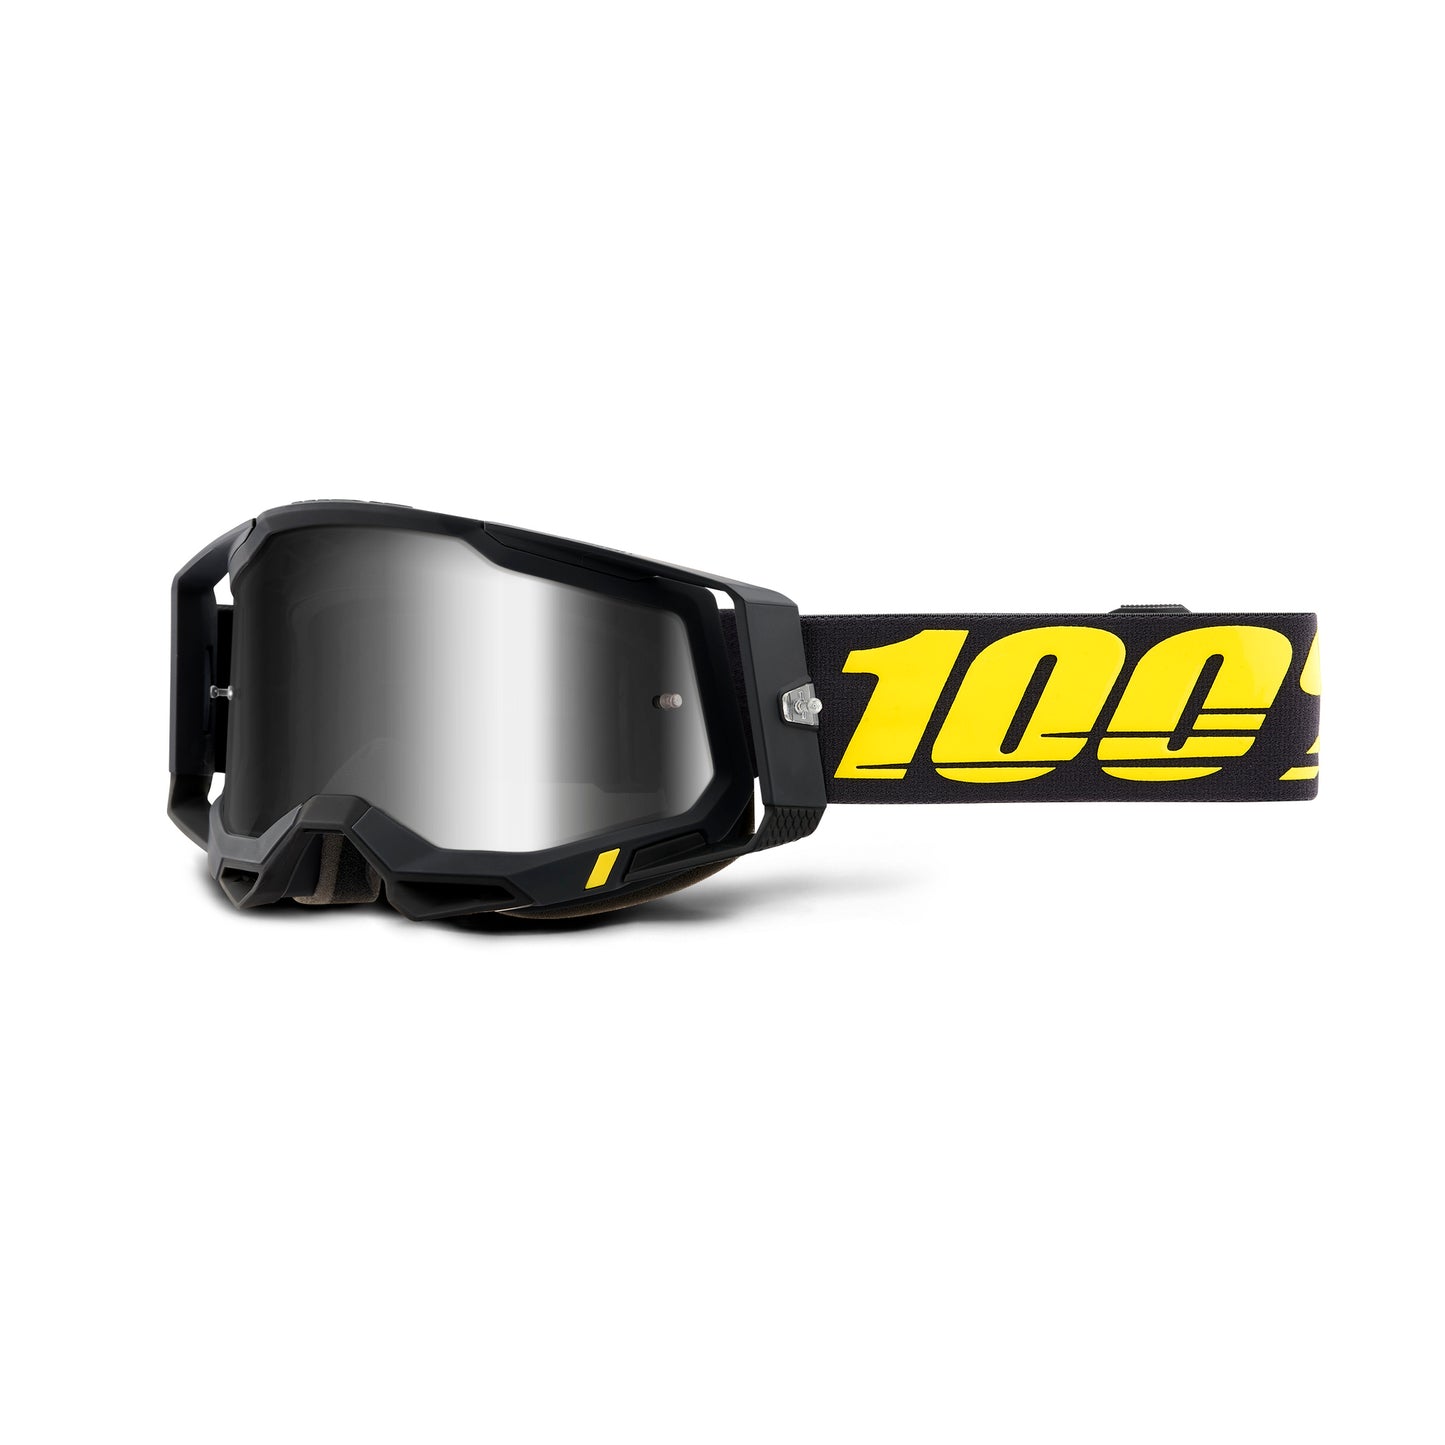 100 Percent Racecraft 2 Goggles - One Size Fits Most - Arbis - Silver Mirror Lens